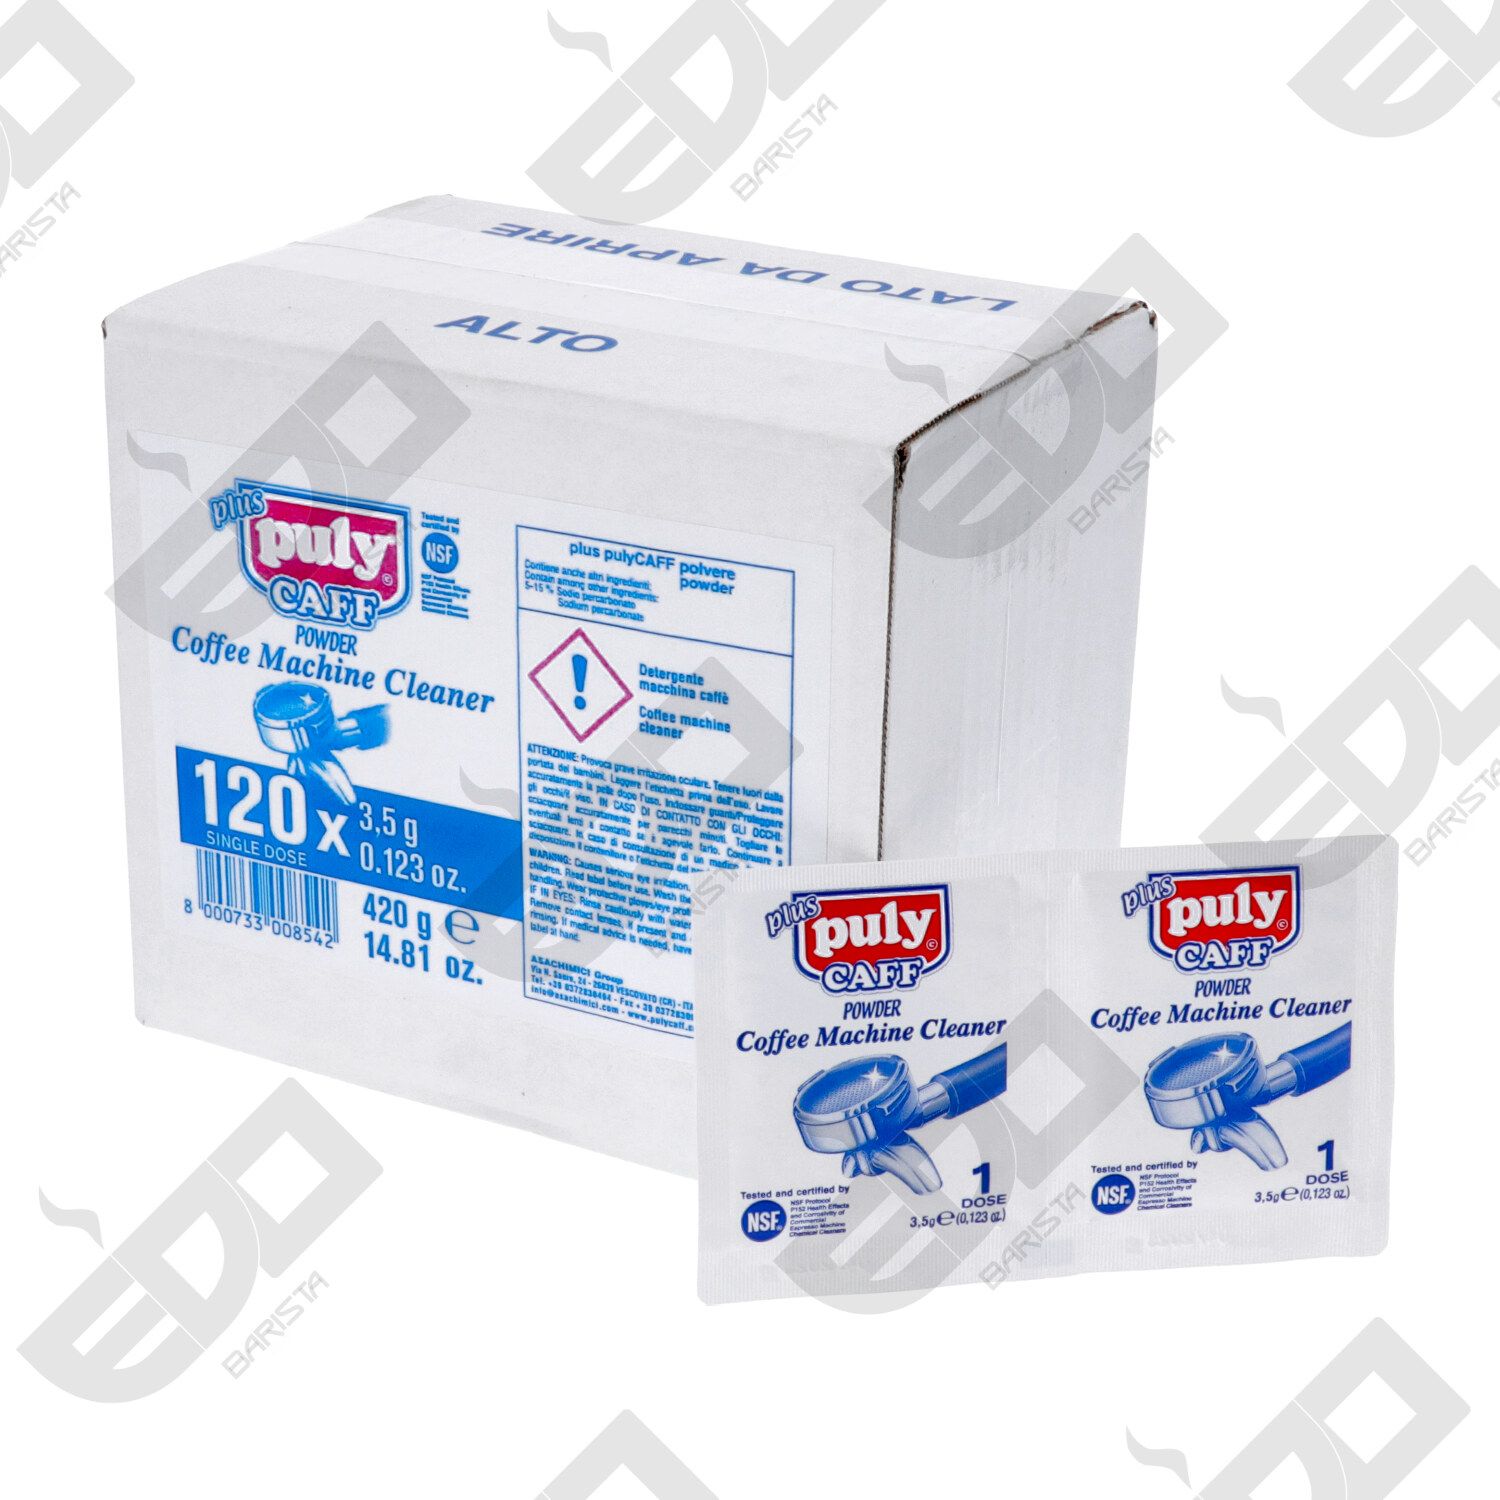 puly caff plus 120 sachets: espresso machine Plus cleaner for the group,  cups and teapots